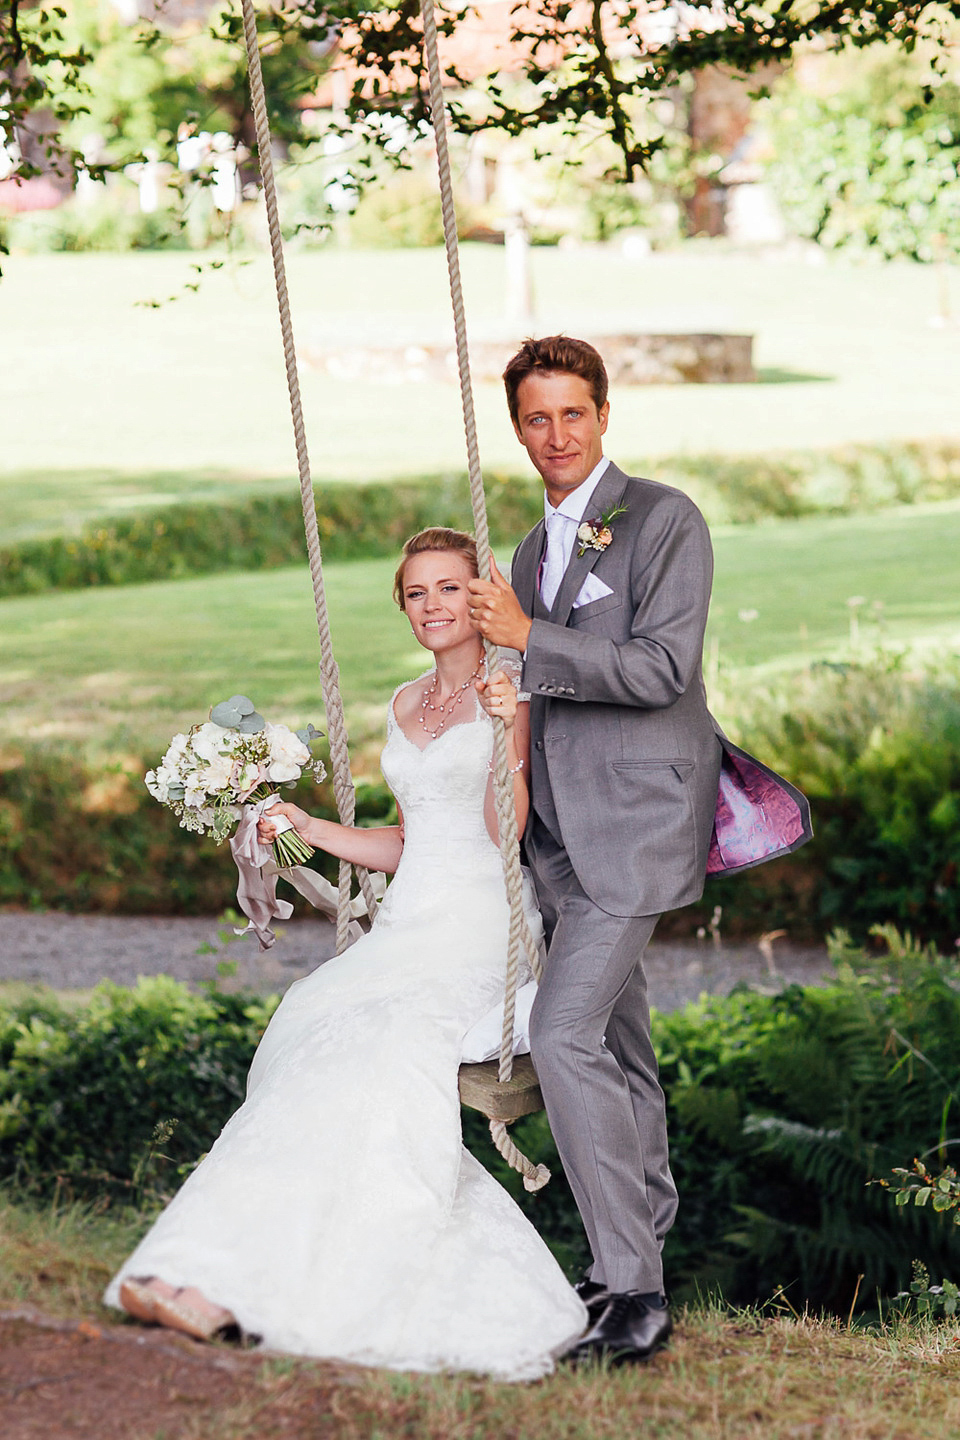 A Suzanne Neville gown for a relaxed and elegant garden wedding. Styled by Blue Fizz events.